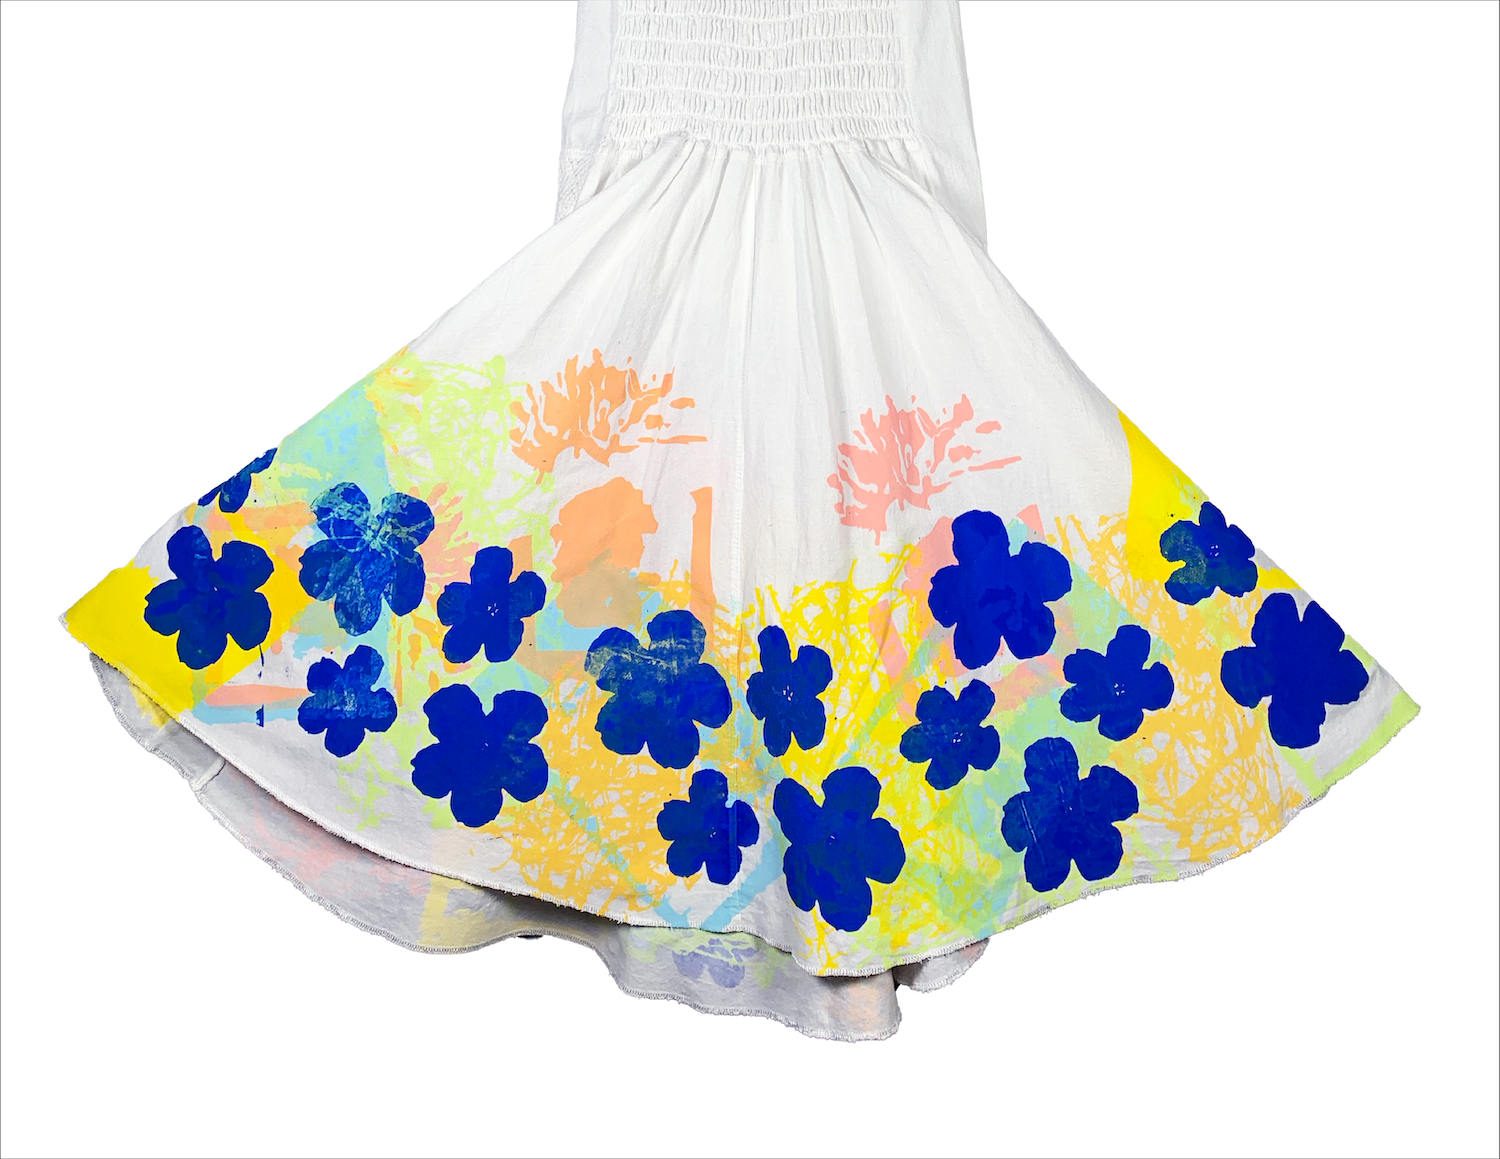 image of dress with colorful print splatters printed around bottom, prints of dark blue flowers stand out the most